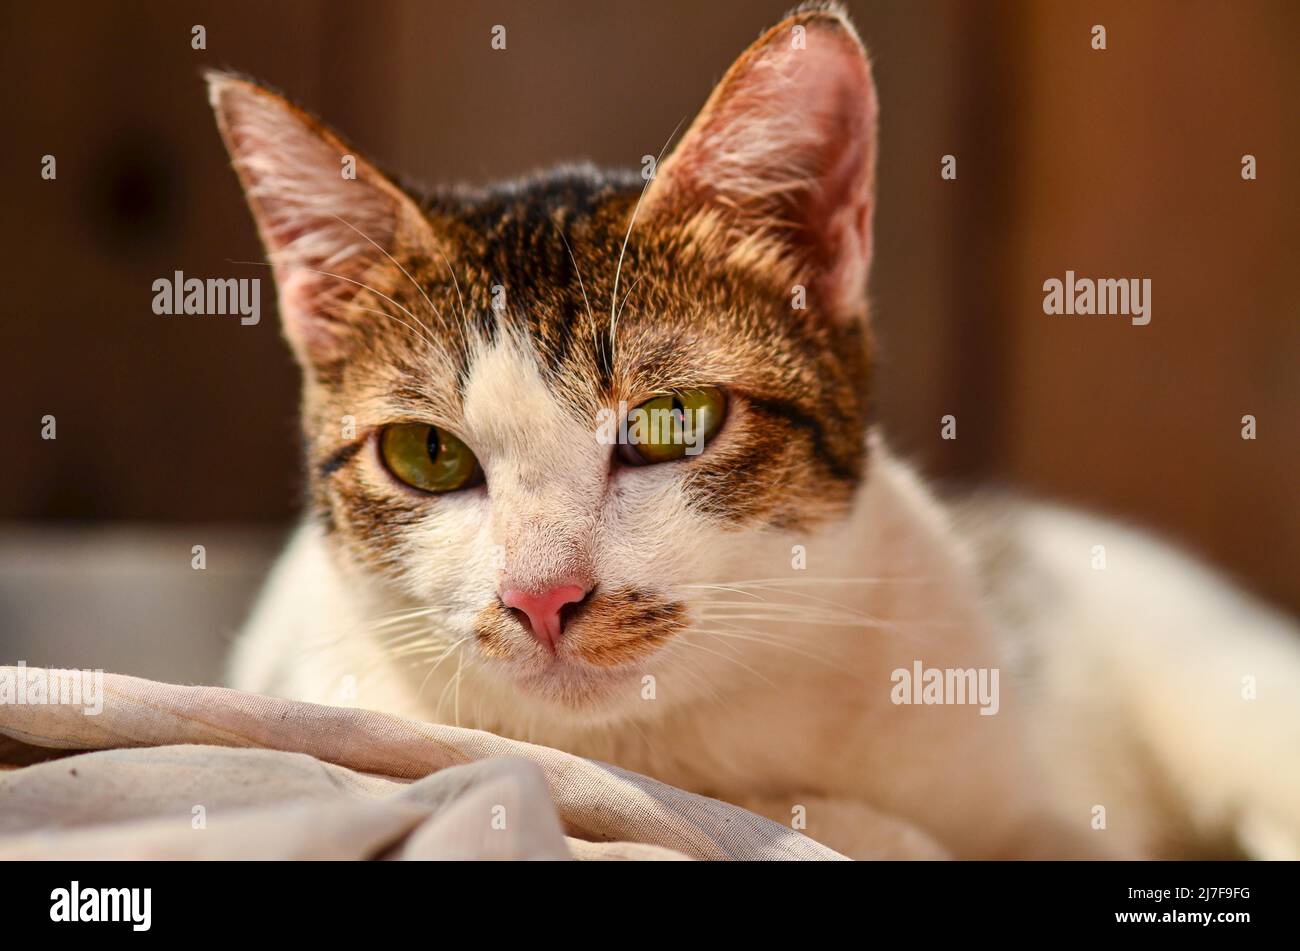 Native cat sleeping in the house Stock Photo